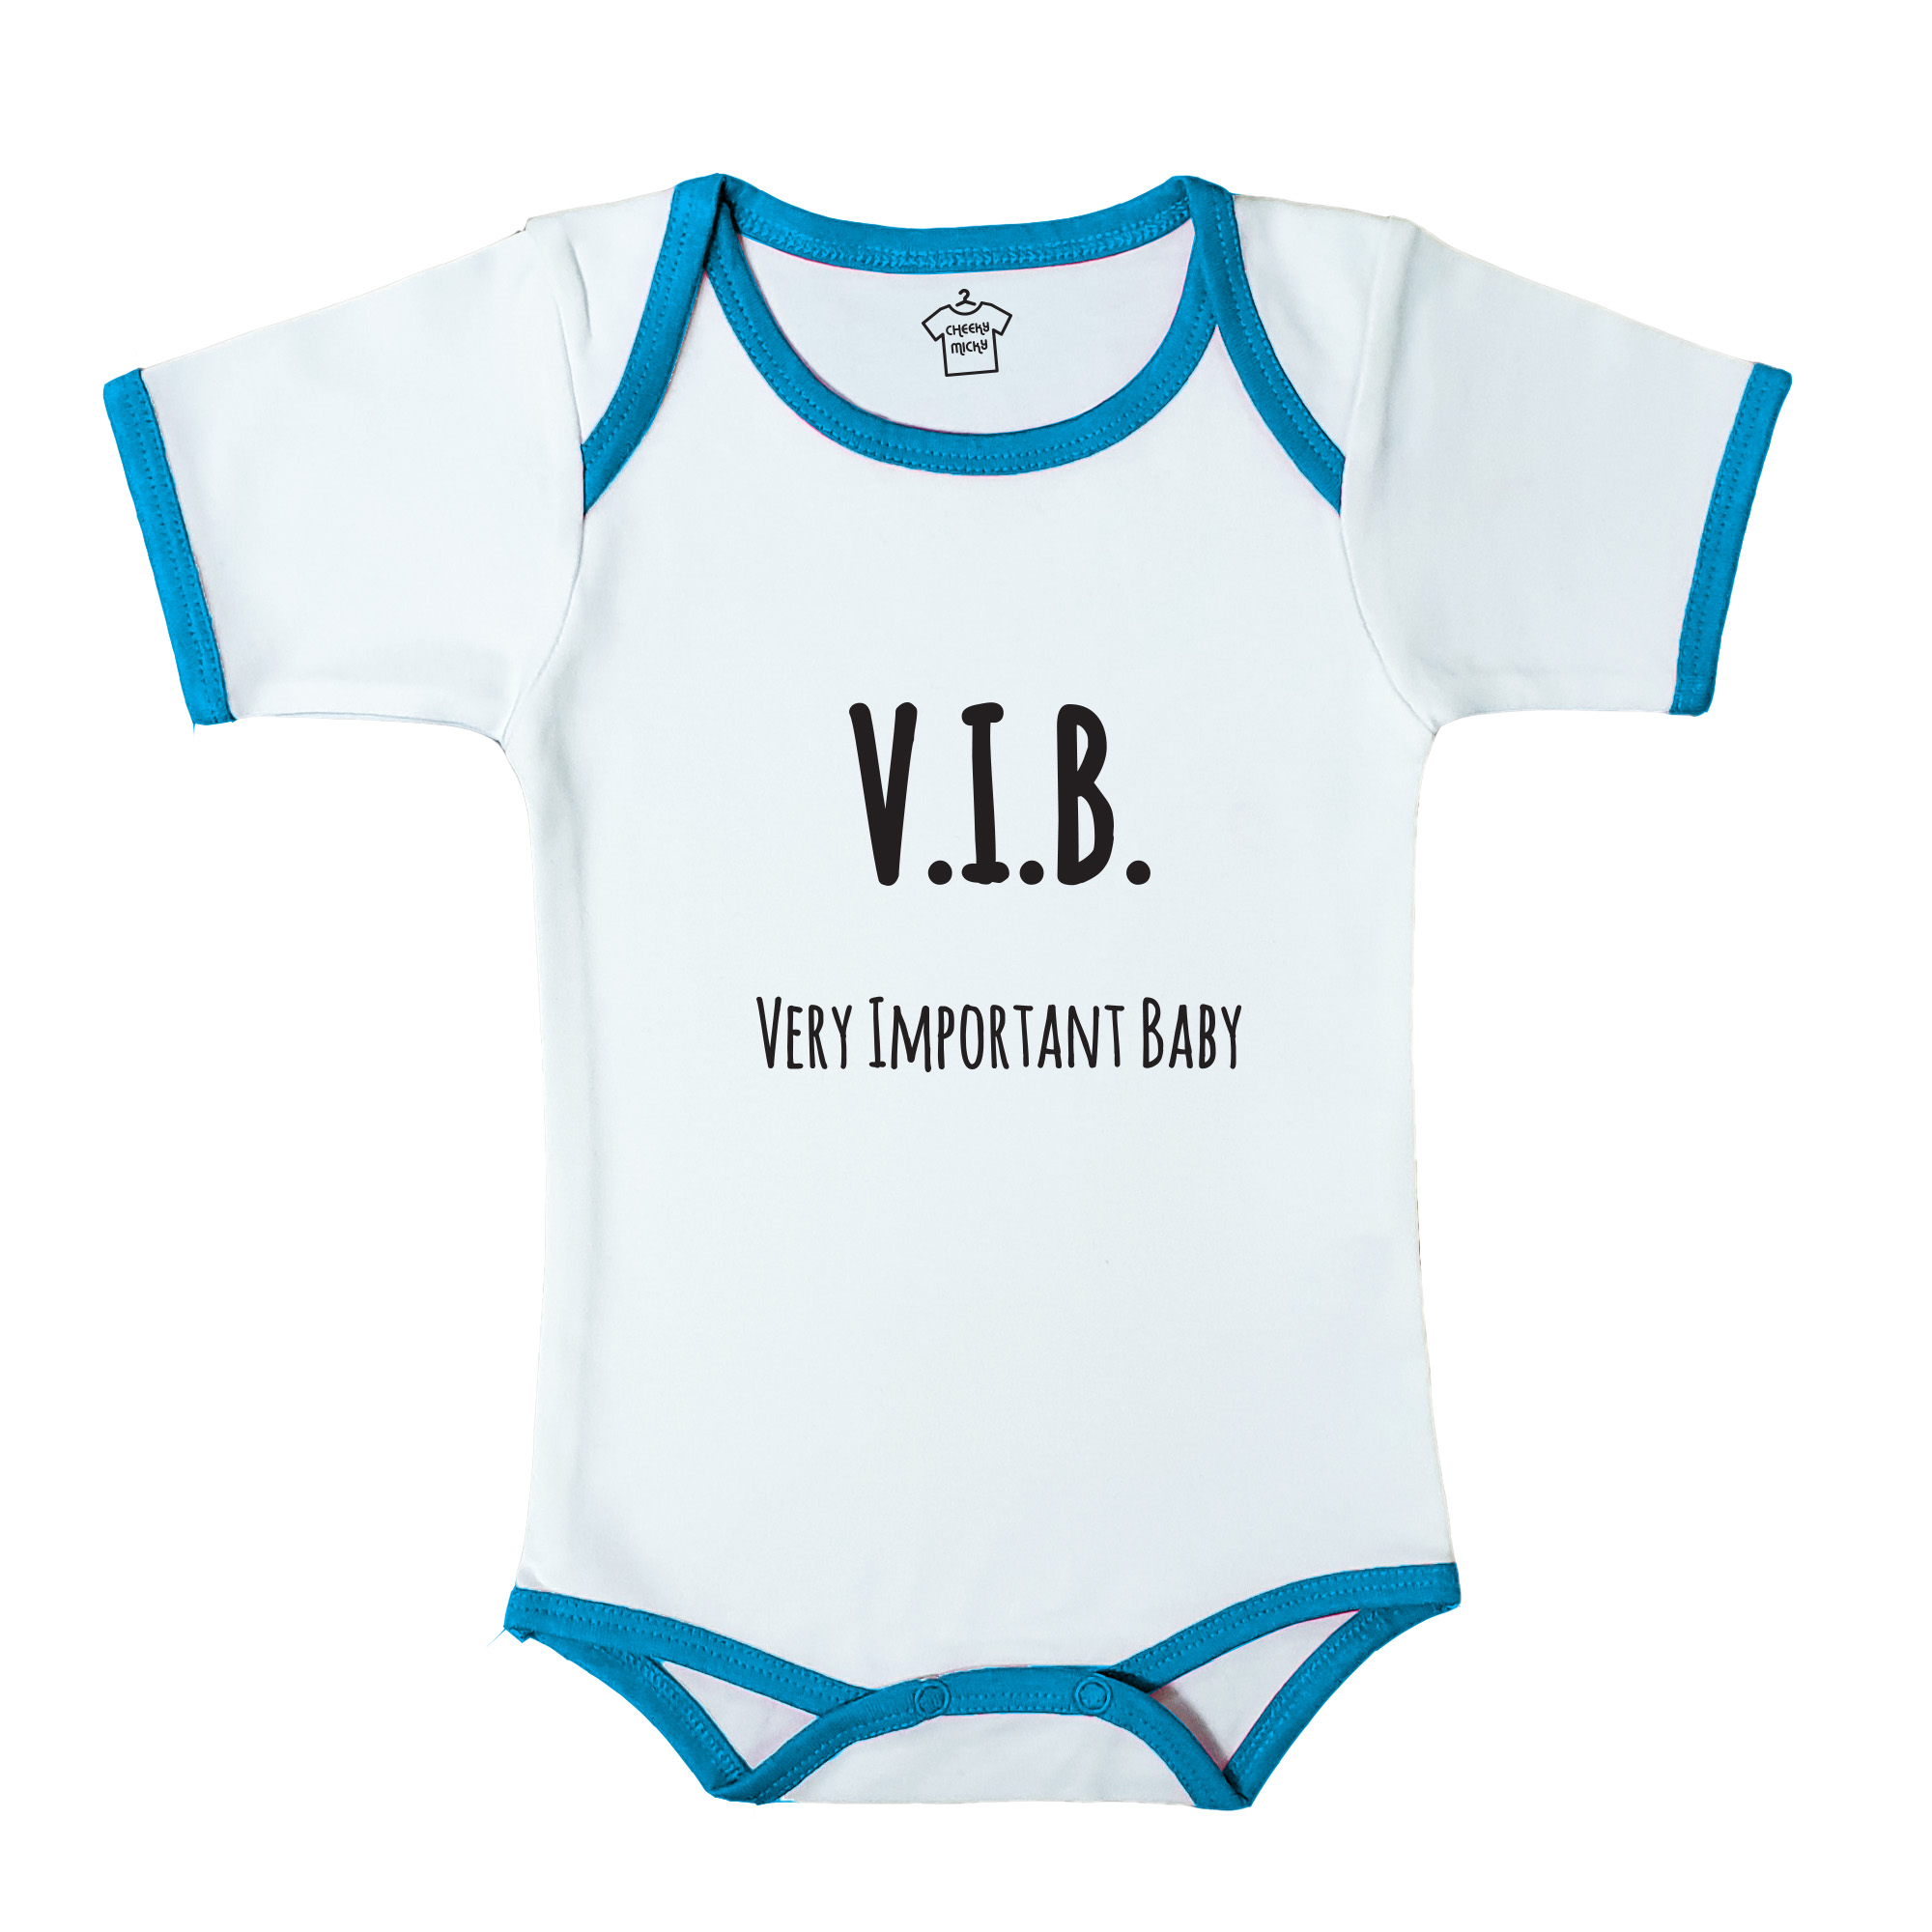 Soft baby body suit with blue trim, 100% cotton, machine washable. Age 6-12 months. Print: V.I.B. Very Important Baby.